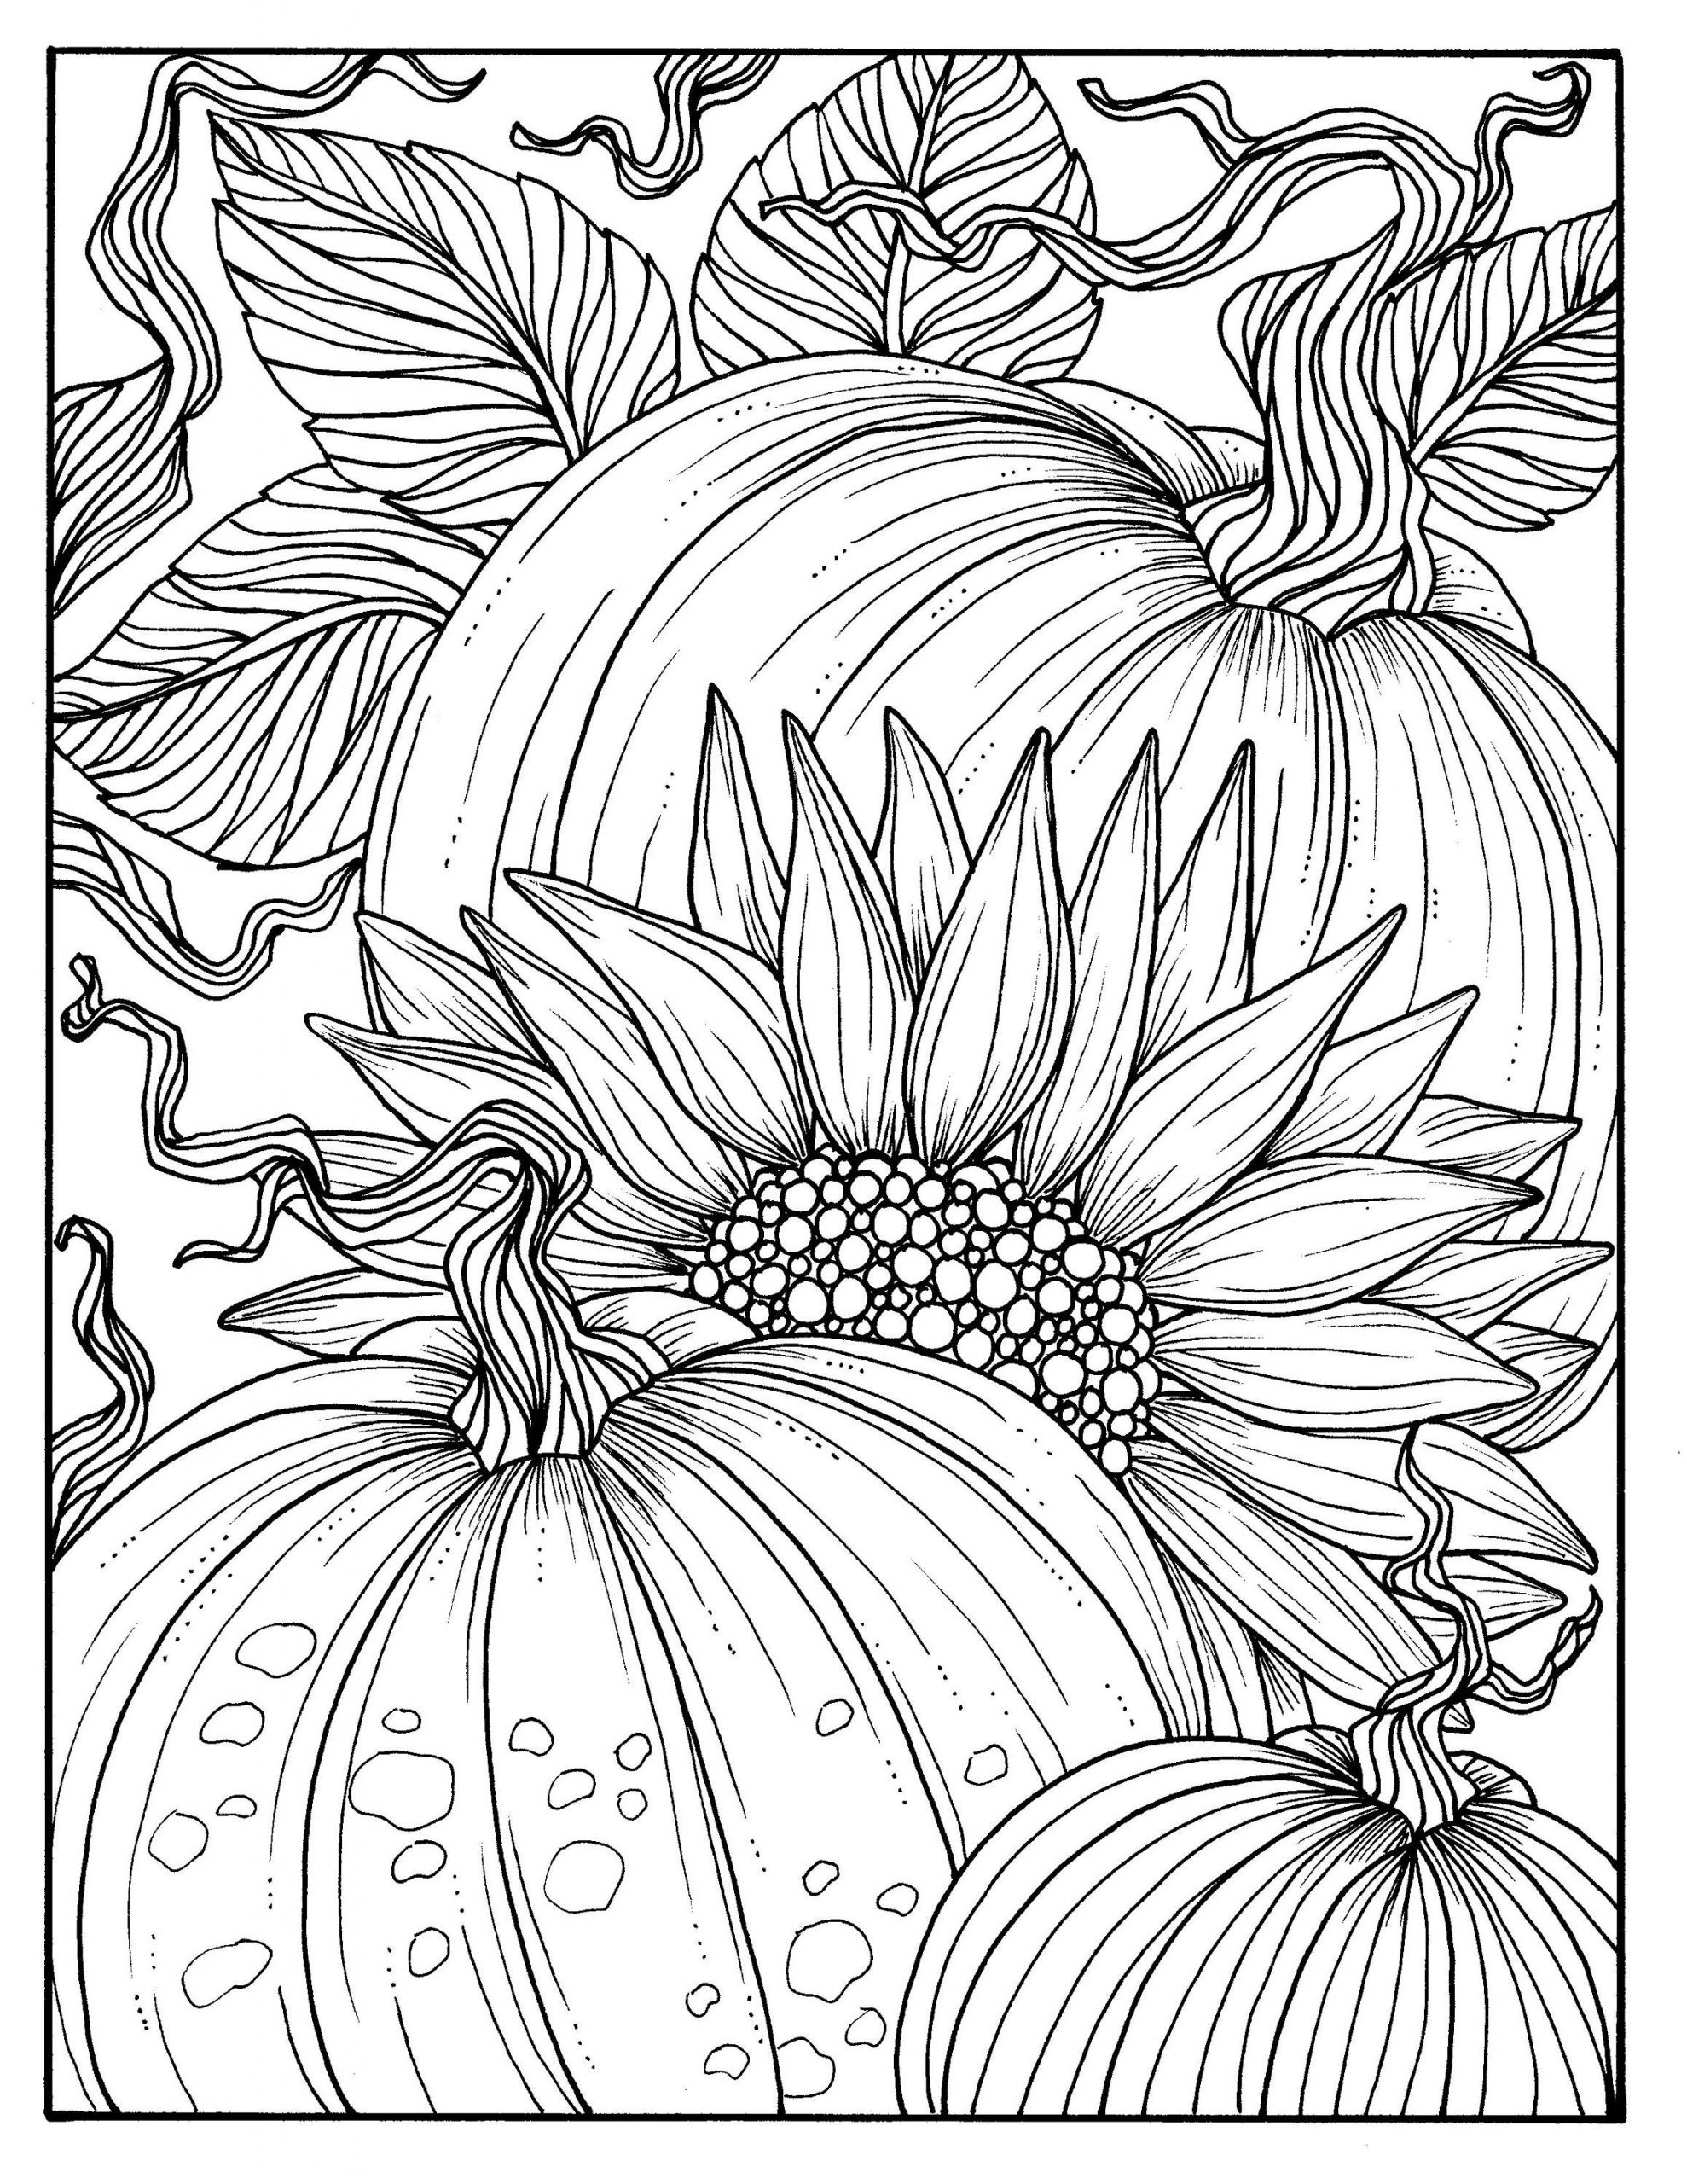 Adult Fall Coloring Pages
 5 Pages Fabulous Fall Digital Downloads to Color Punpkins